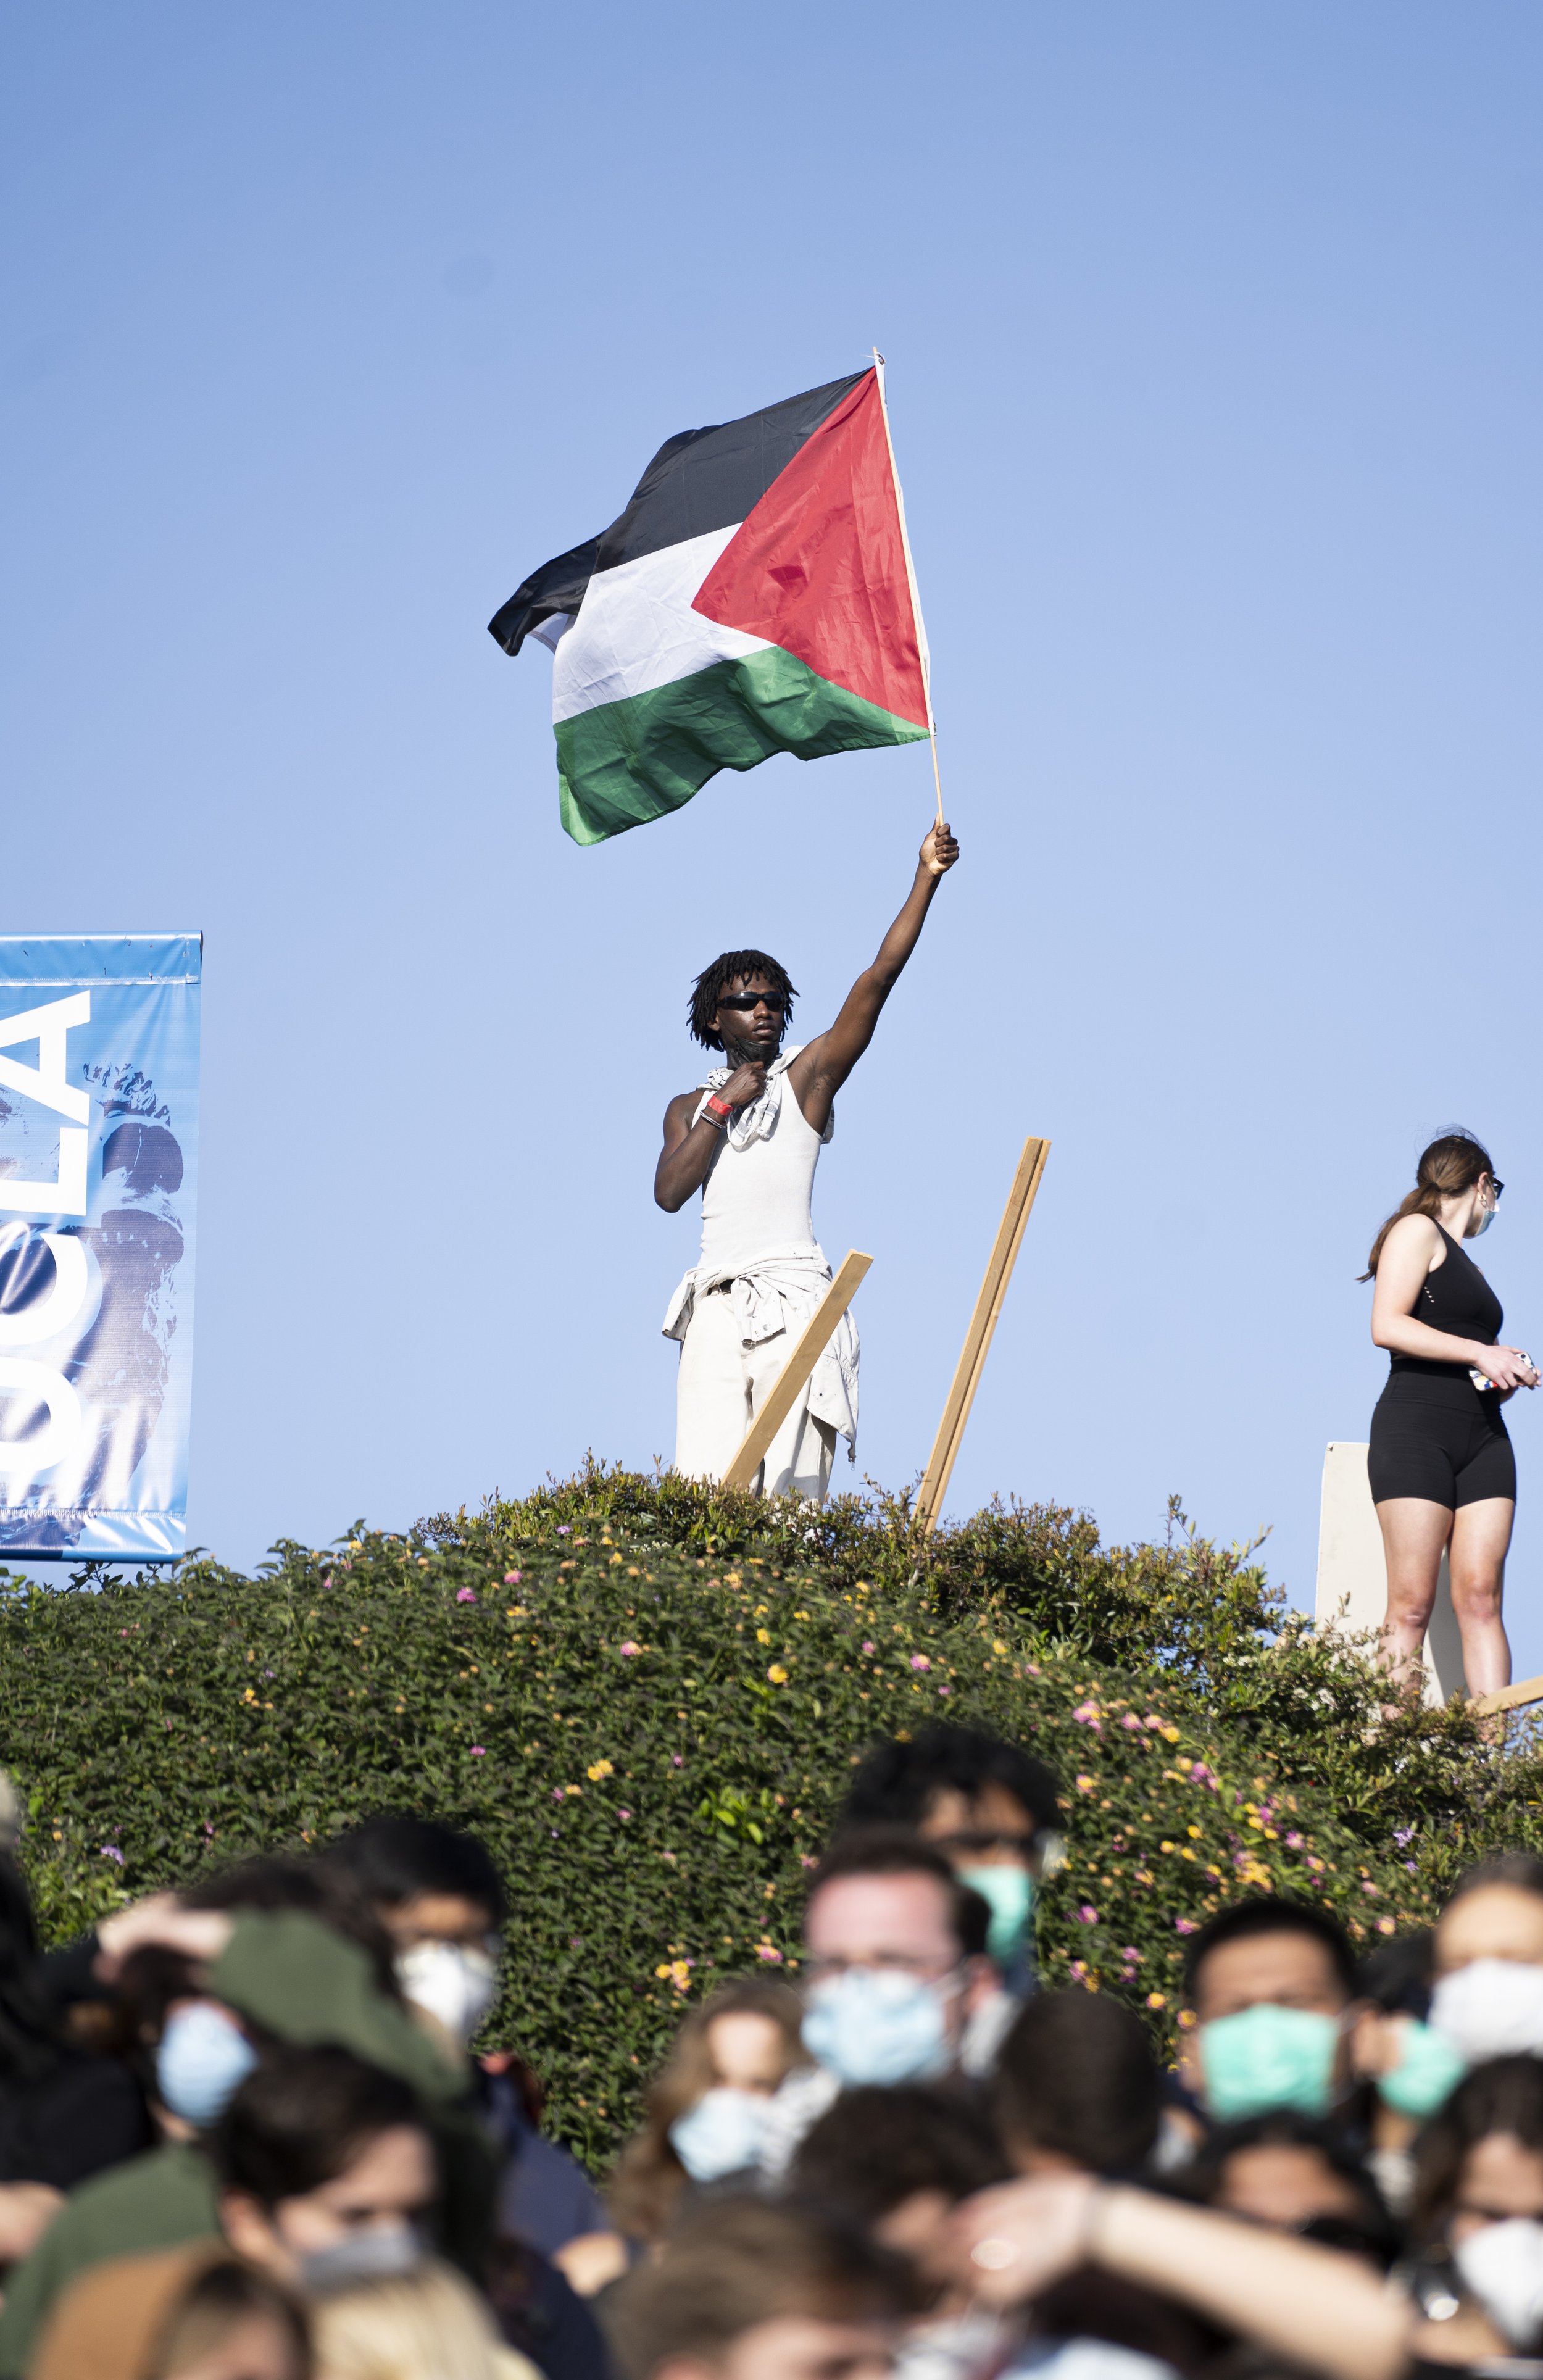  Pro-Palastinian supporter stands within the border of the University of California, Los Angeles(UCLA) encampment while holding a Palastinian flag on Wednesday, May 1 at Dickson Court of UCLA in Los Angeles, Calif. (Danilo Perez | The Corsair) 